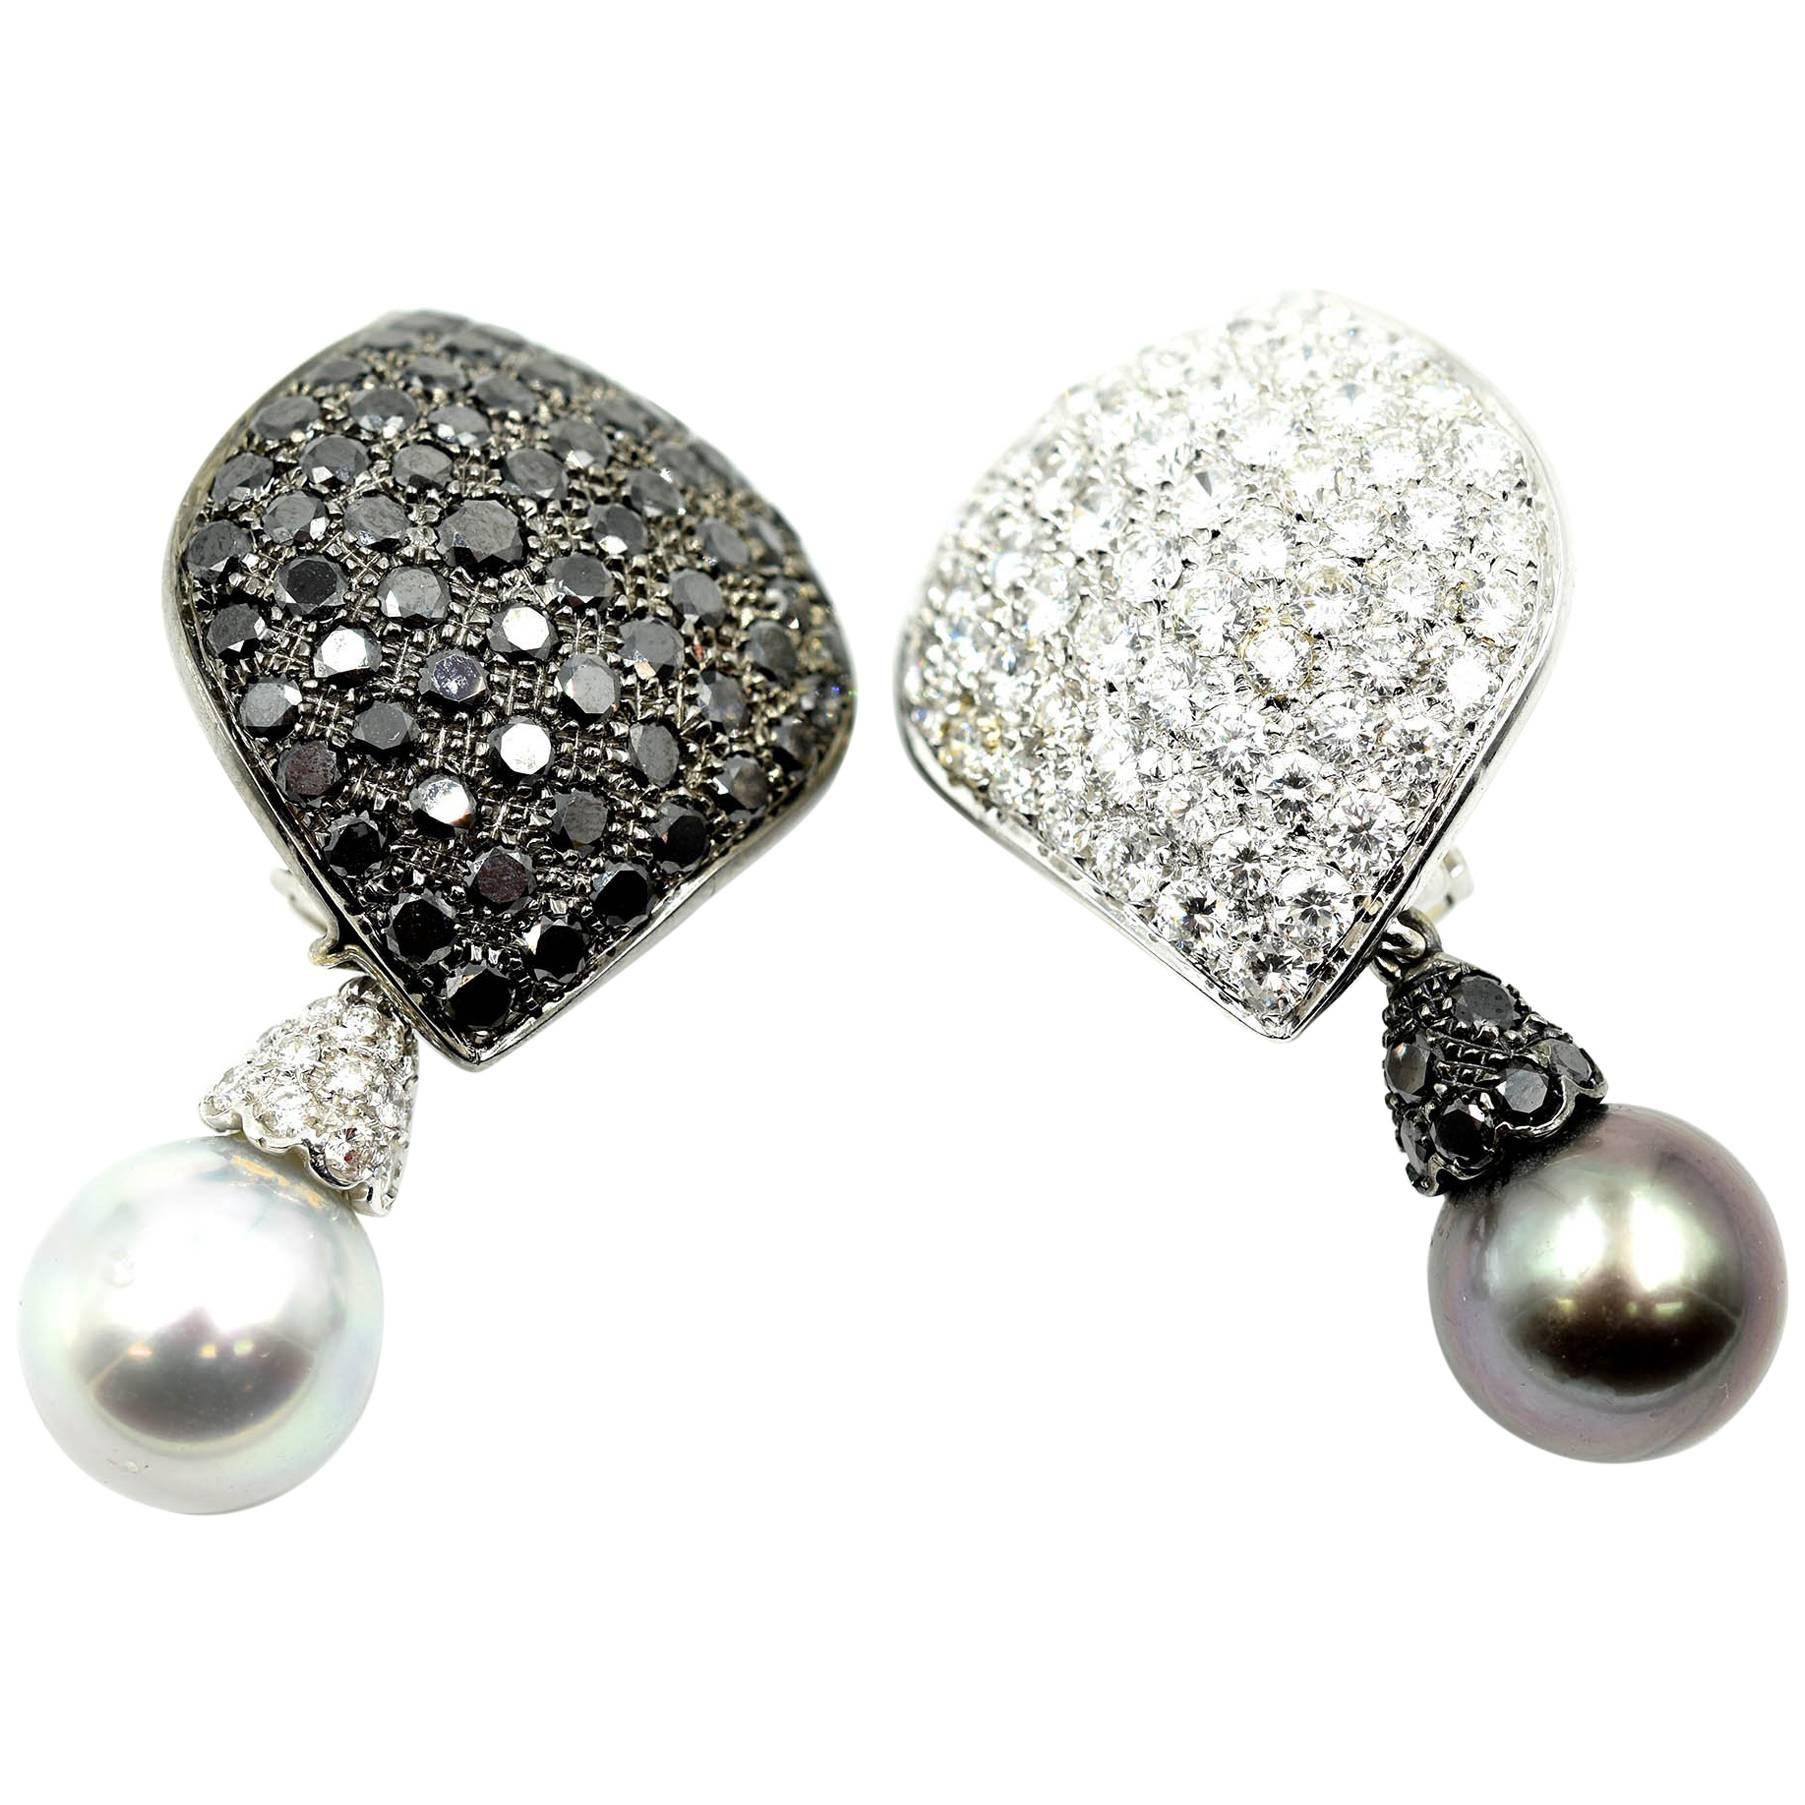 Black and White Diamond with Dangling Cultured Pearls 18k White Gold Earrings